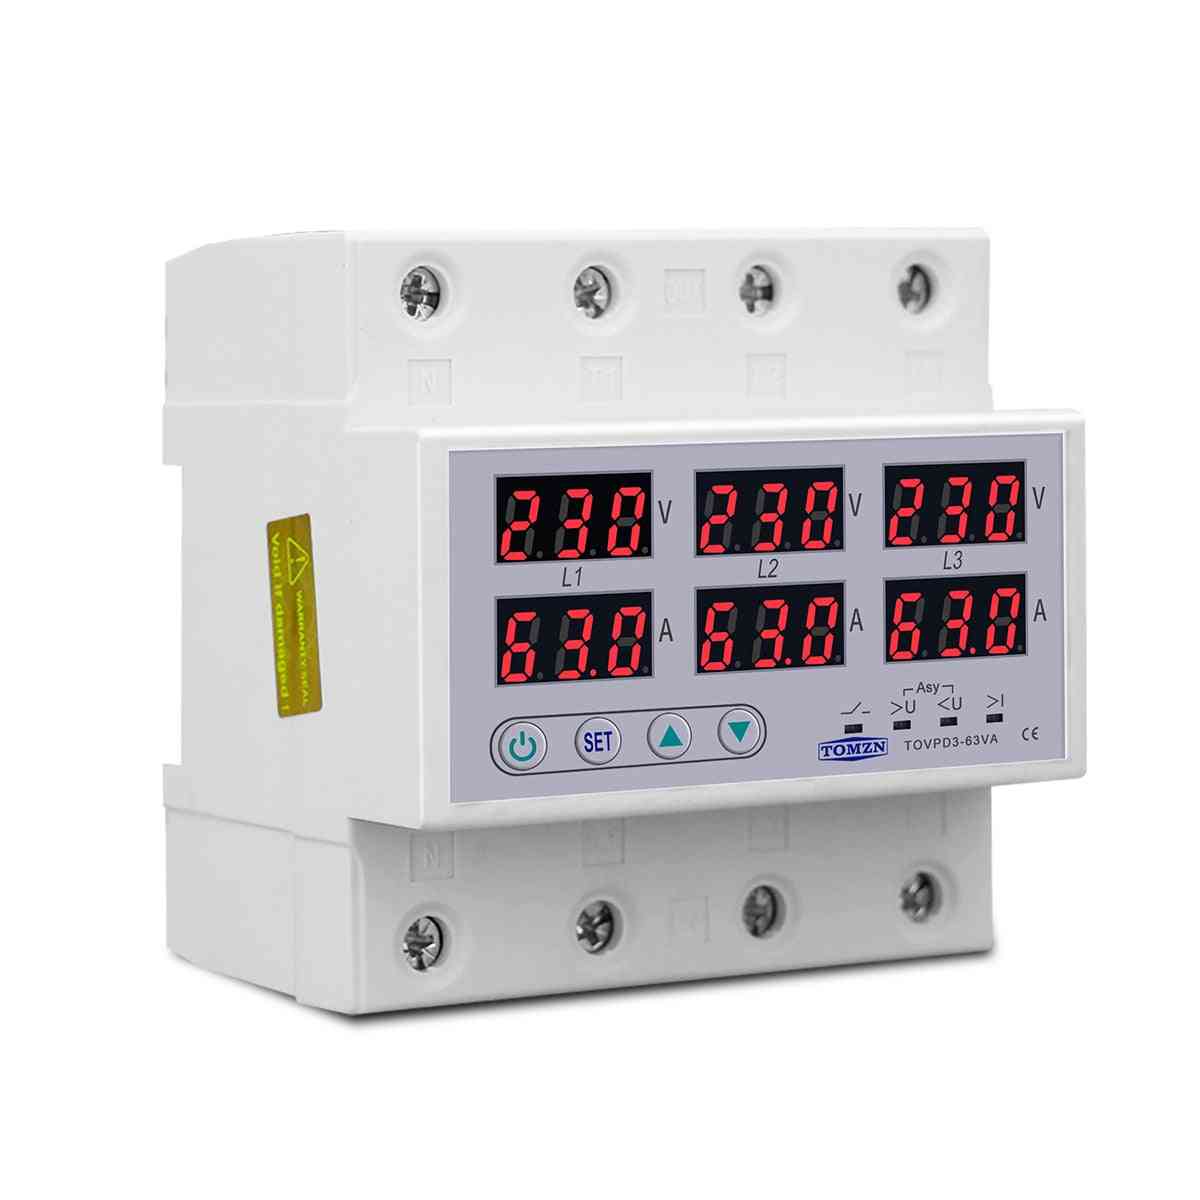 Adjustable Over And Under Voltage, Current Limit Protection Monitor, Relays Protector